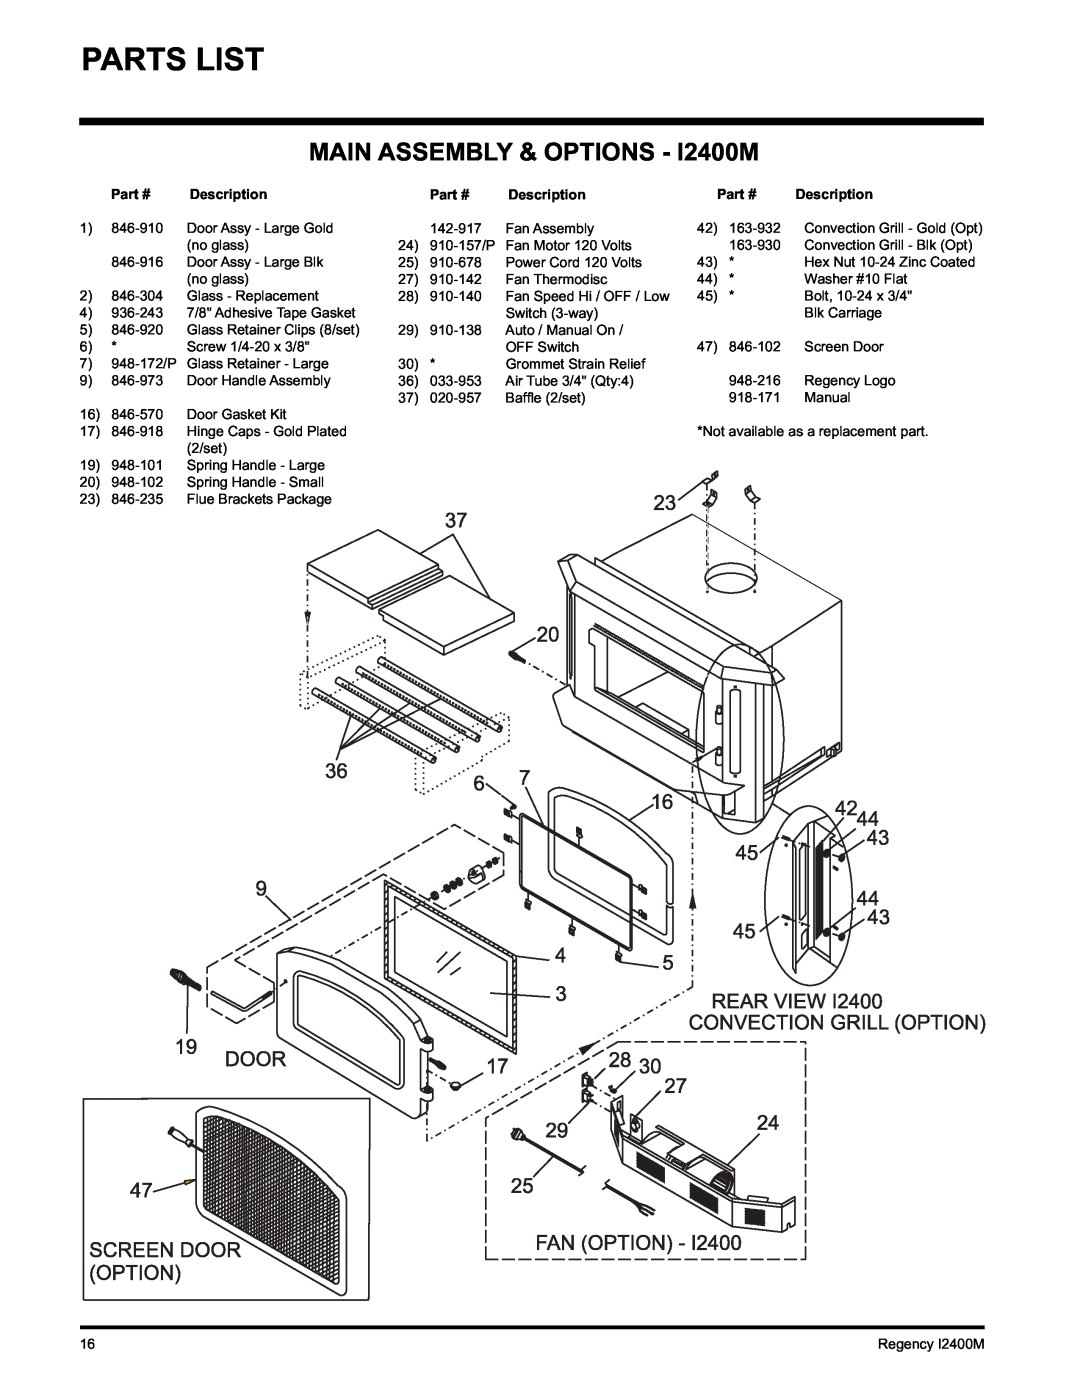 Regency Wraps installation manual Parts List, MAIN ASSEMBLY & OPTIONS - I2400M 